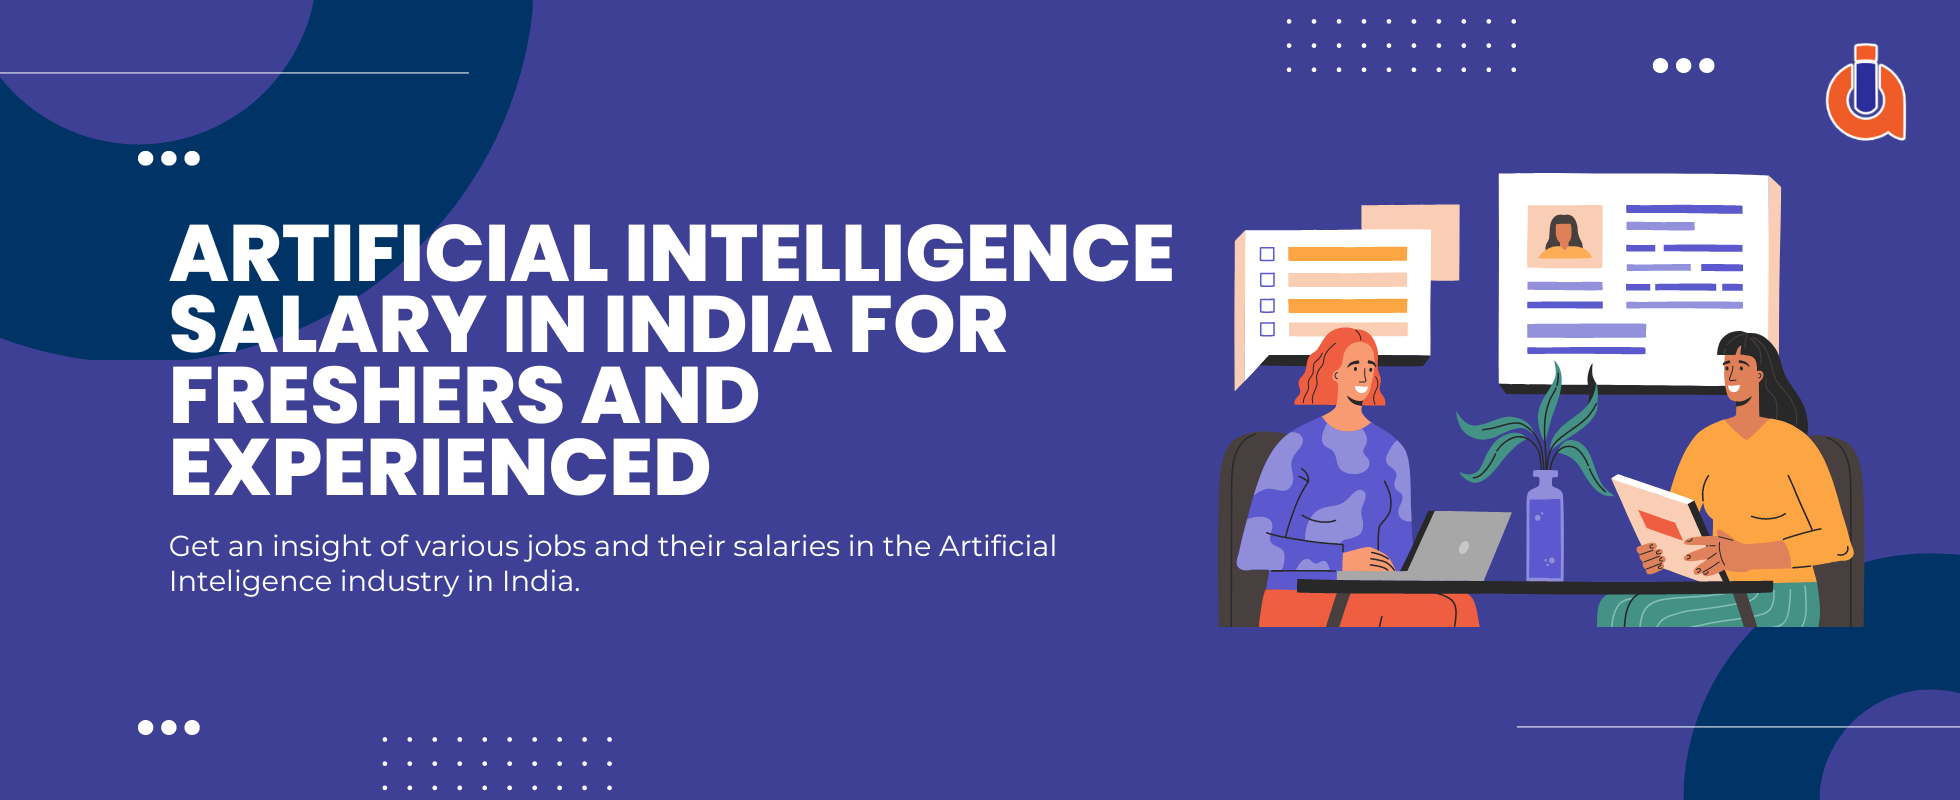 Artificial Intelligence Salary in India